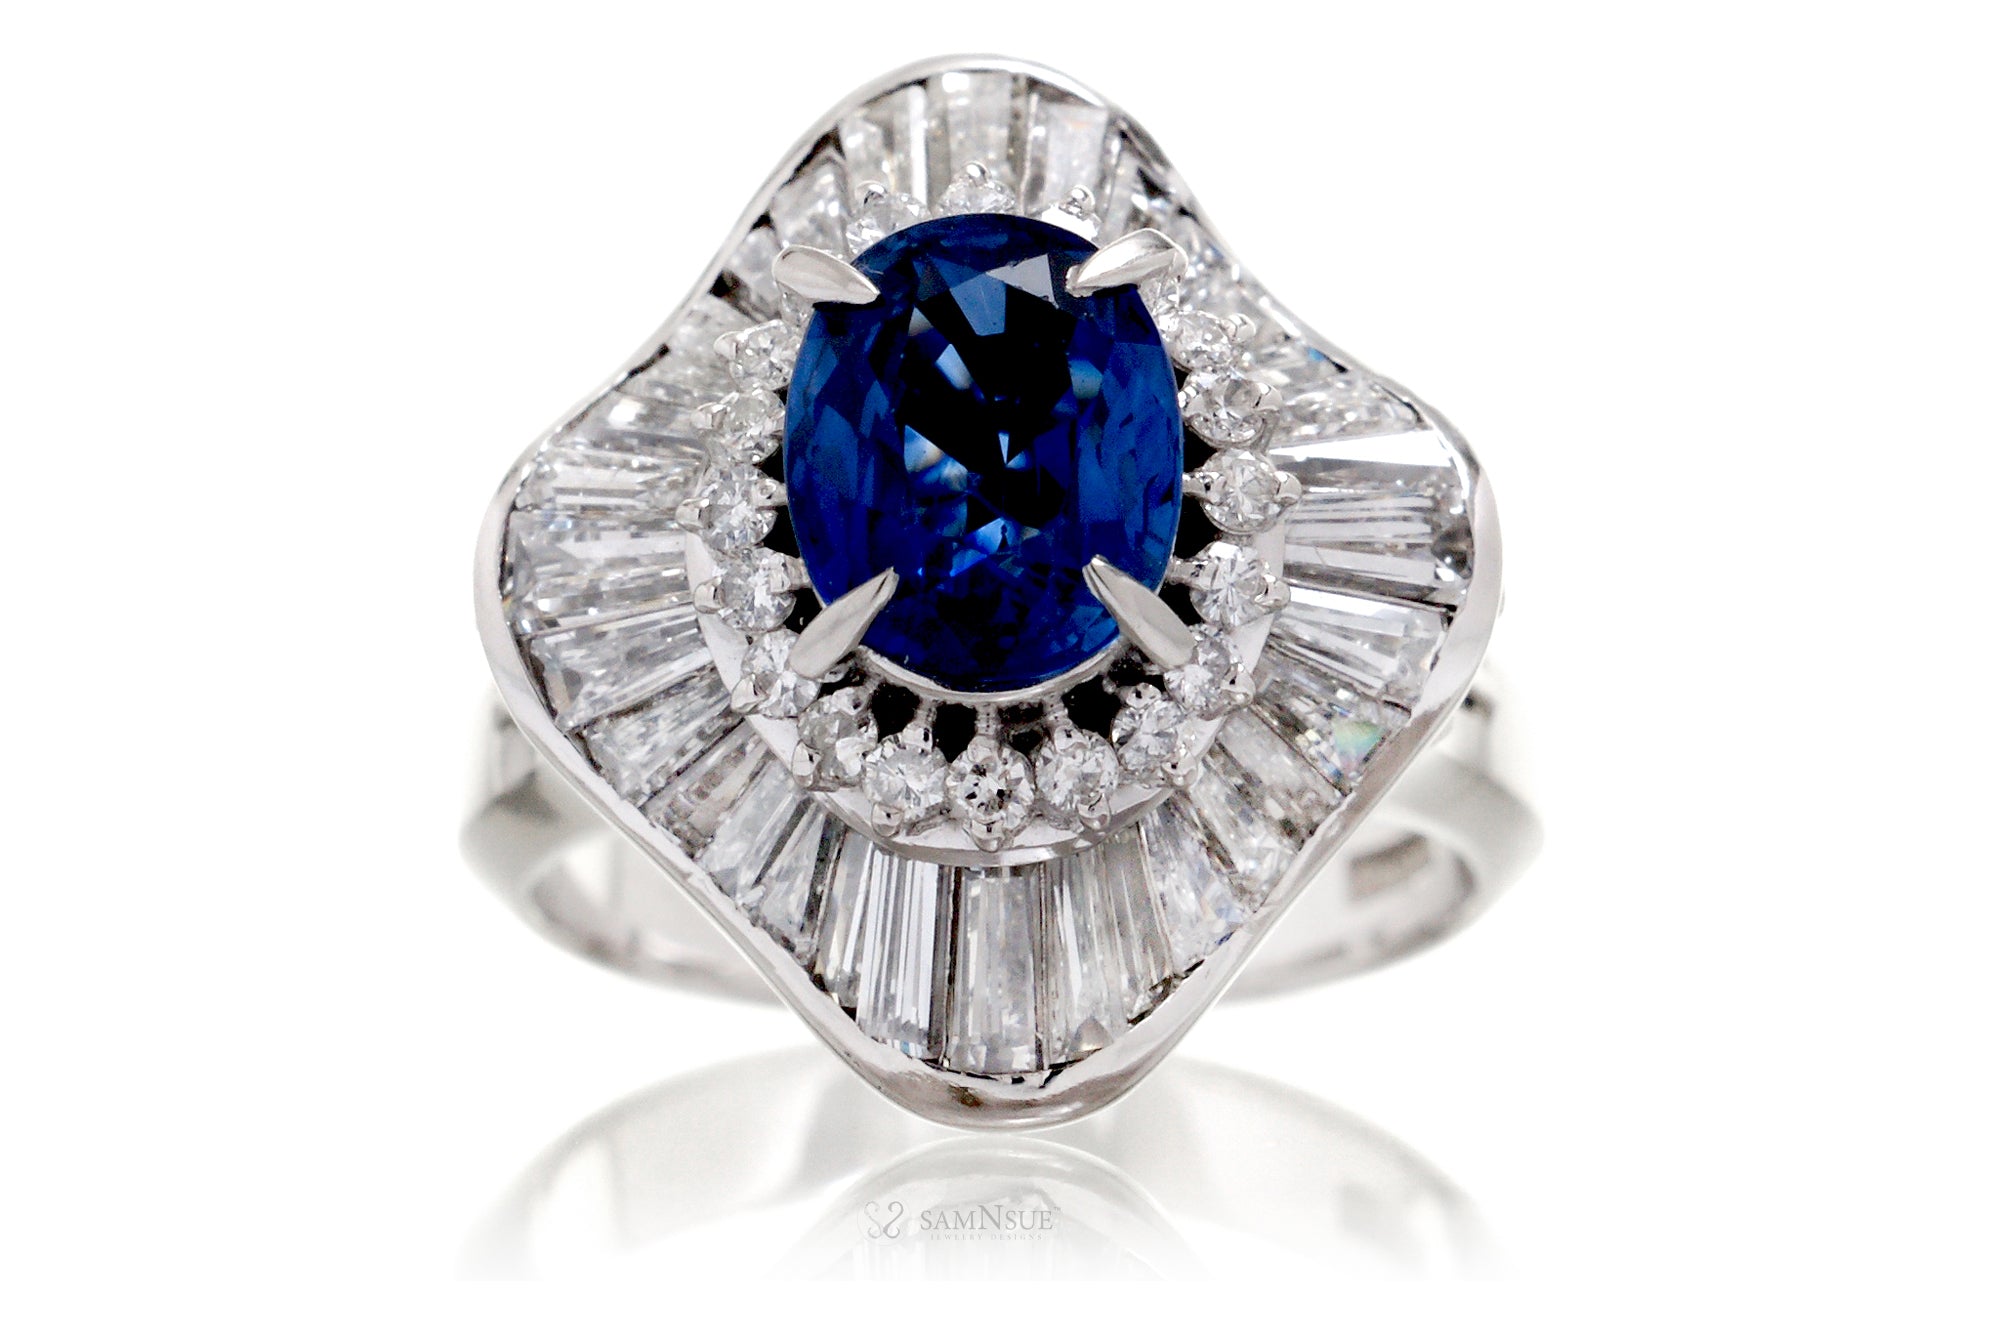 Woman vintage style sapphire engagement ring with diamond ballerina baguettes